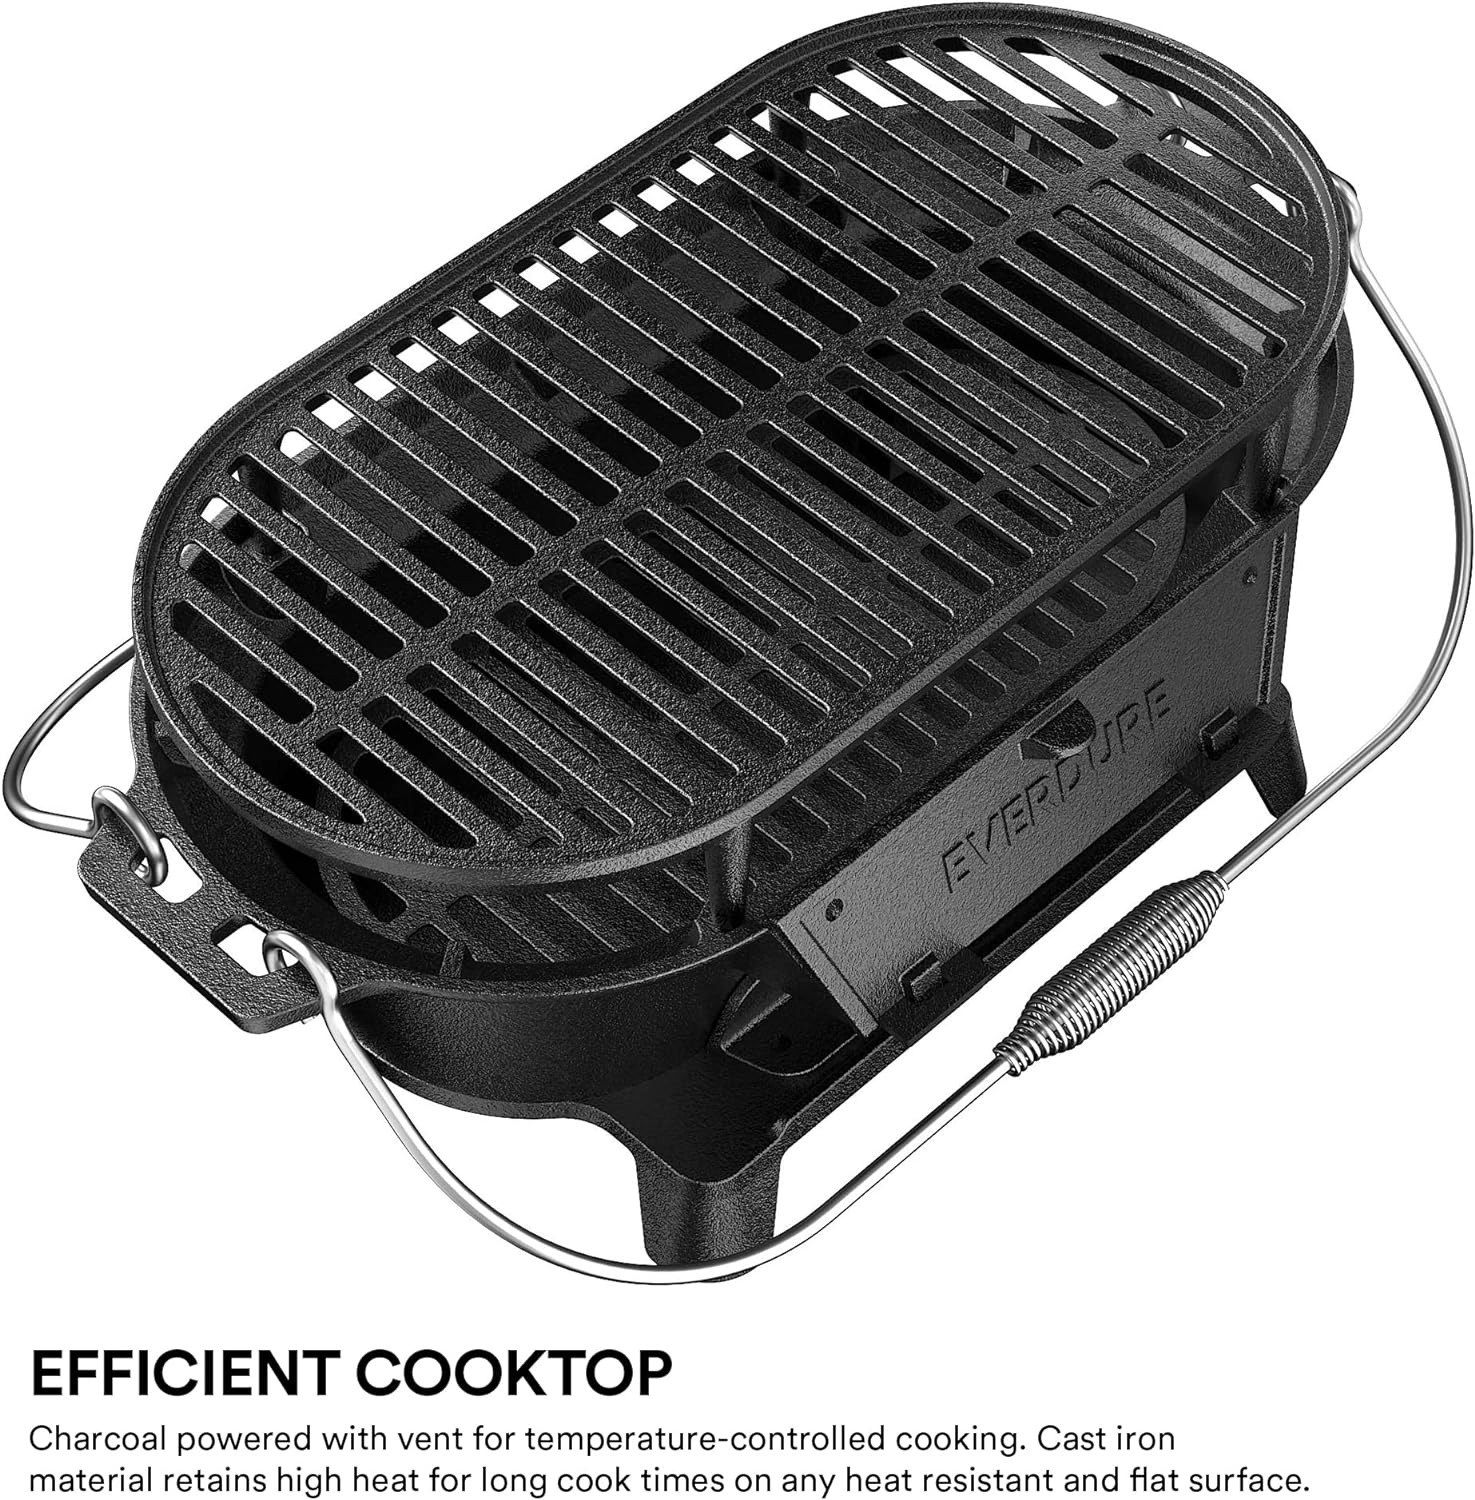 Everdure Oval Cast Iron Grill & Cover Review